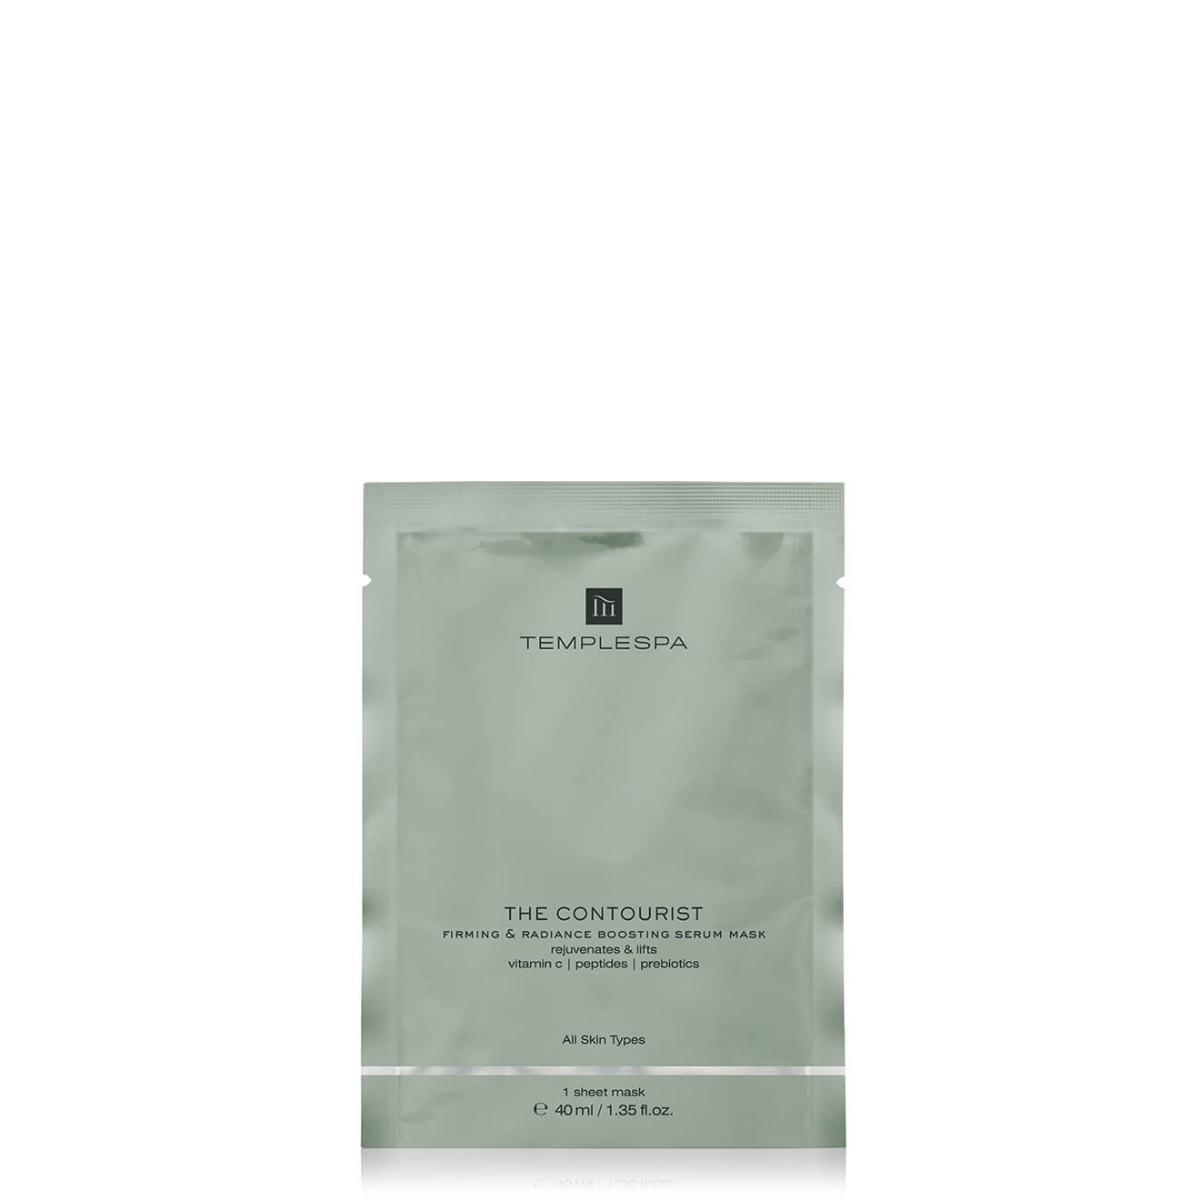 Firming & Radiance Boosting Serum Mask - THE CONTOURIST (SINGLE)